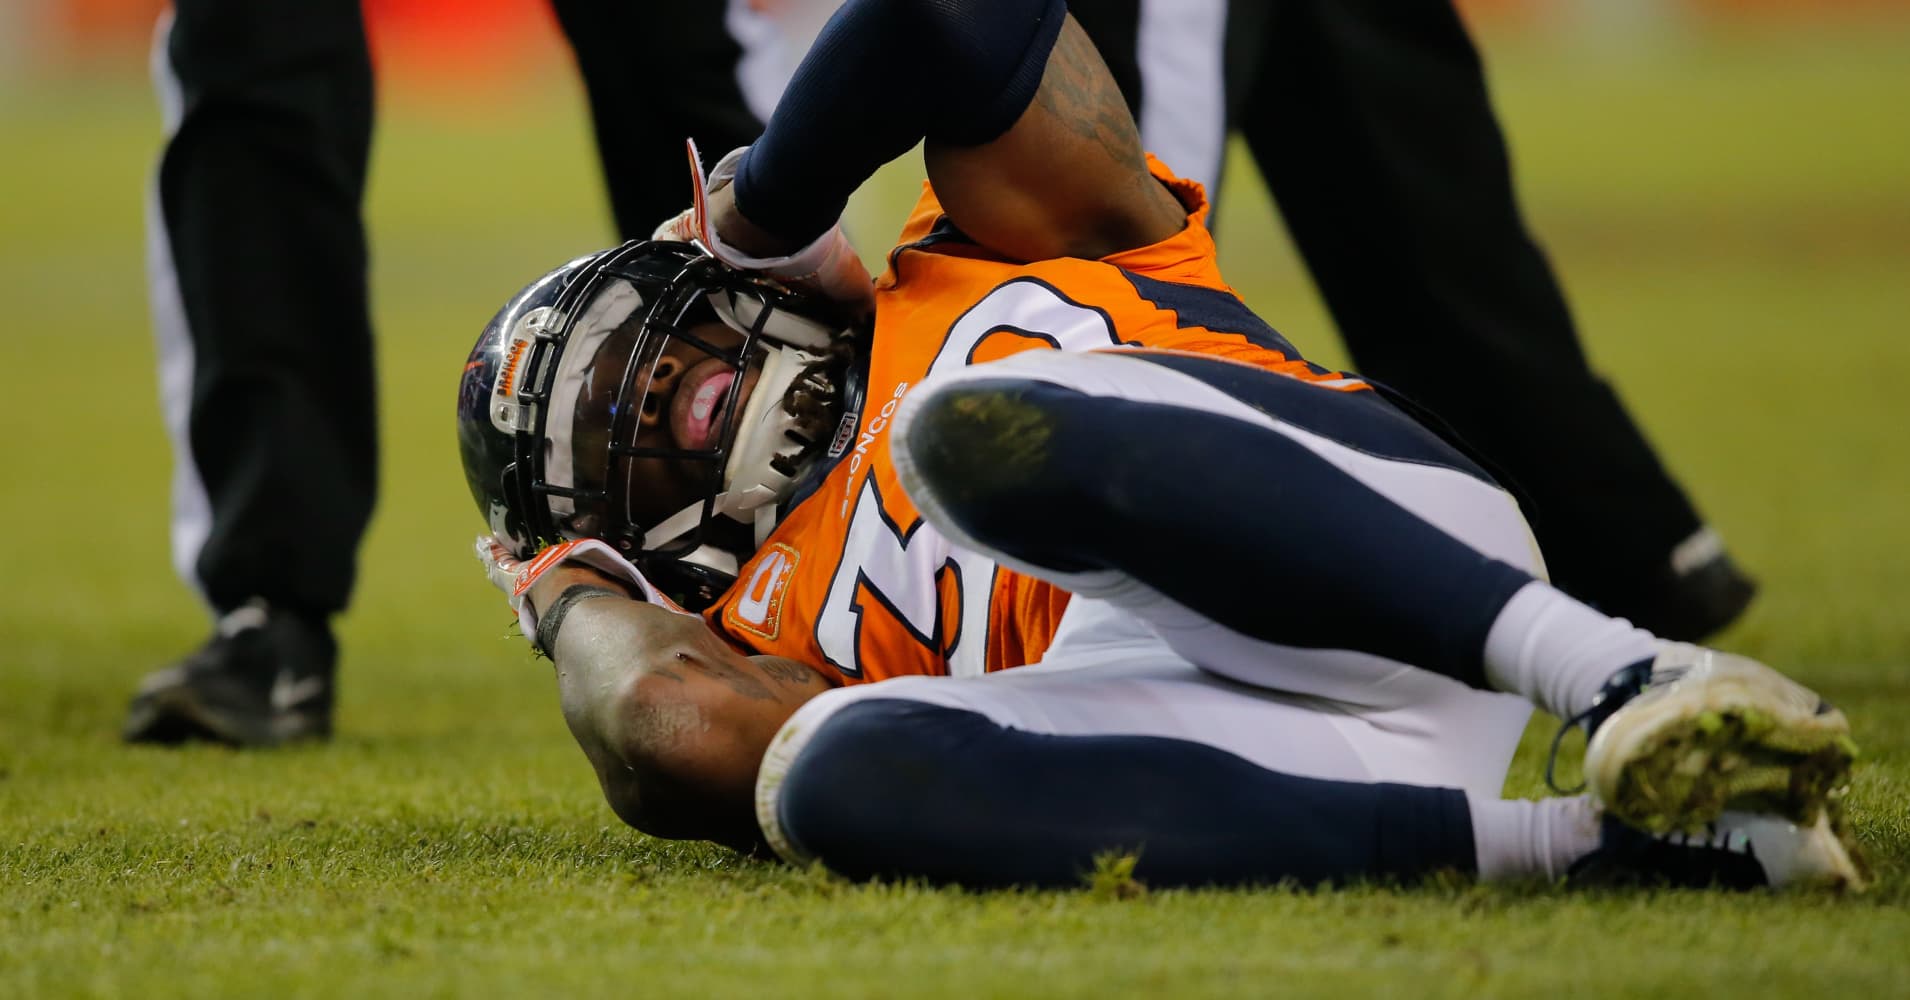 NFL's answer to concussions: Sports science